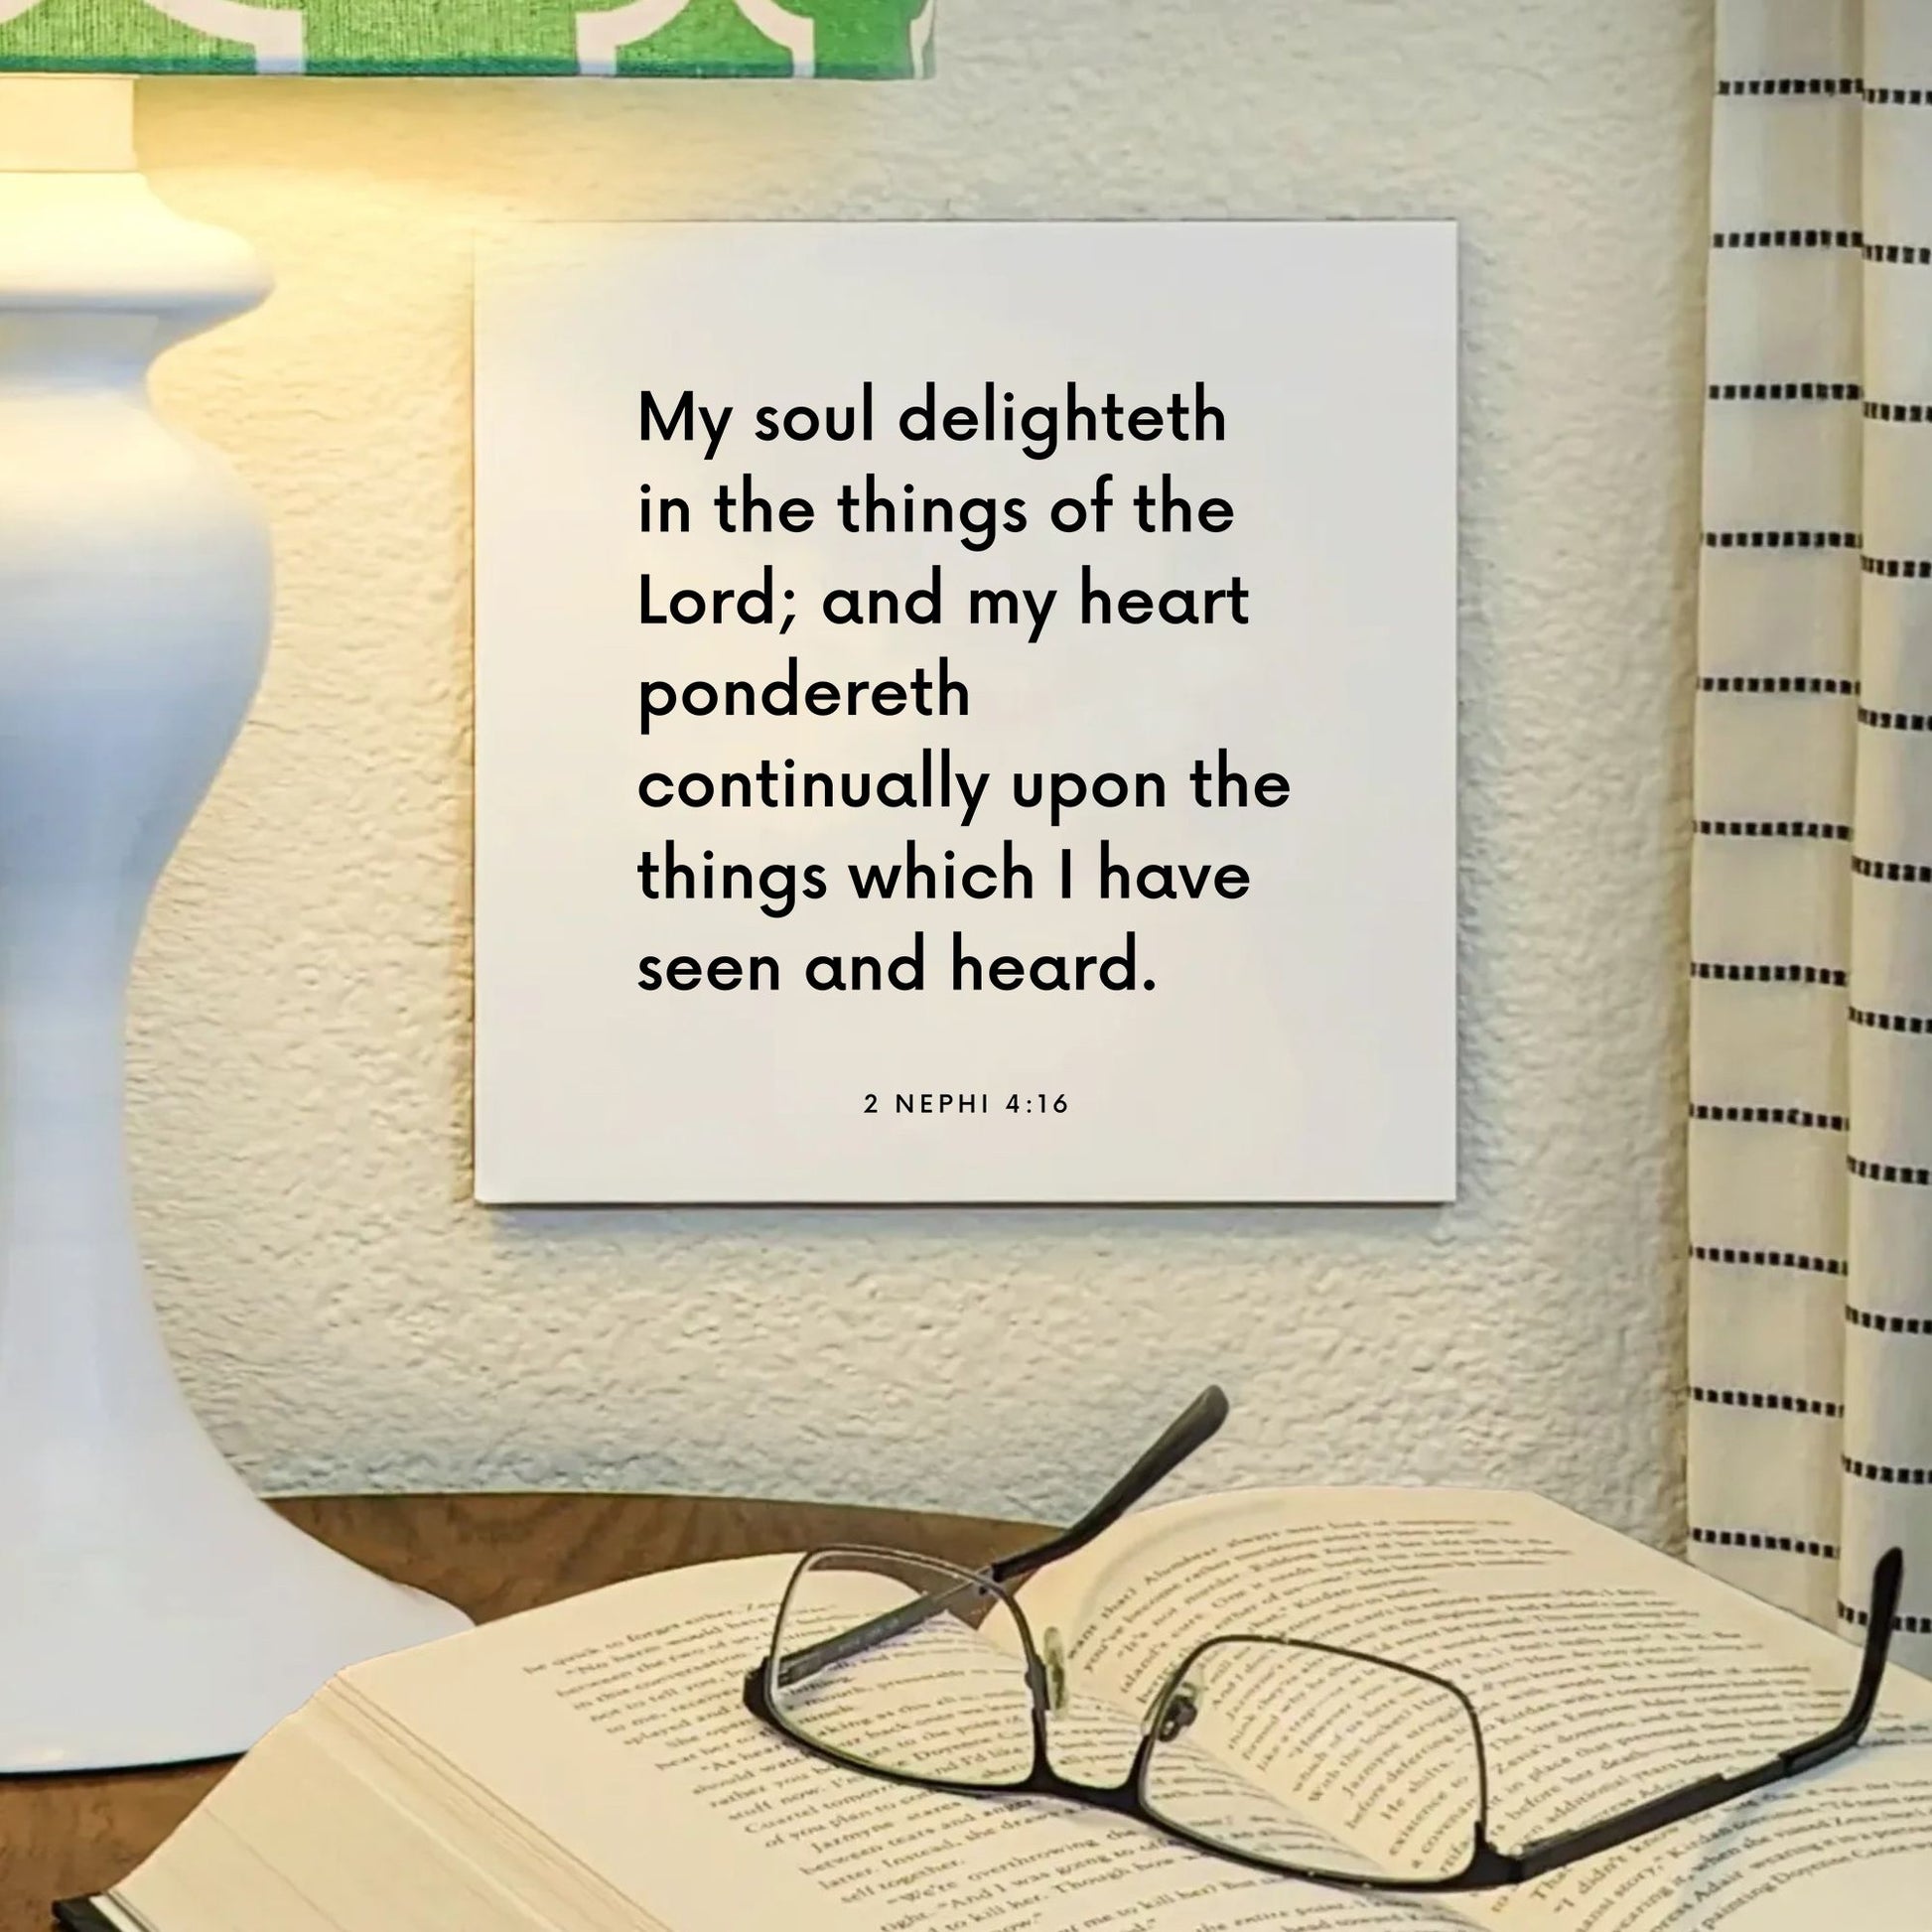 Lamp mouting of the scripture tile for 2 Nephi 4:16 - "My soul delighteth in the things of the Lord"